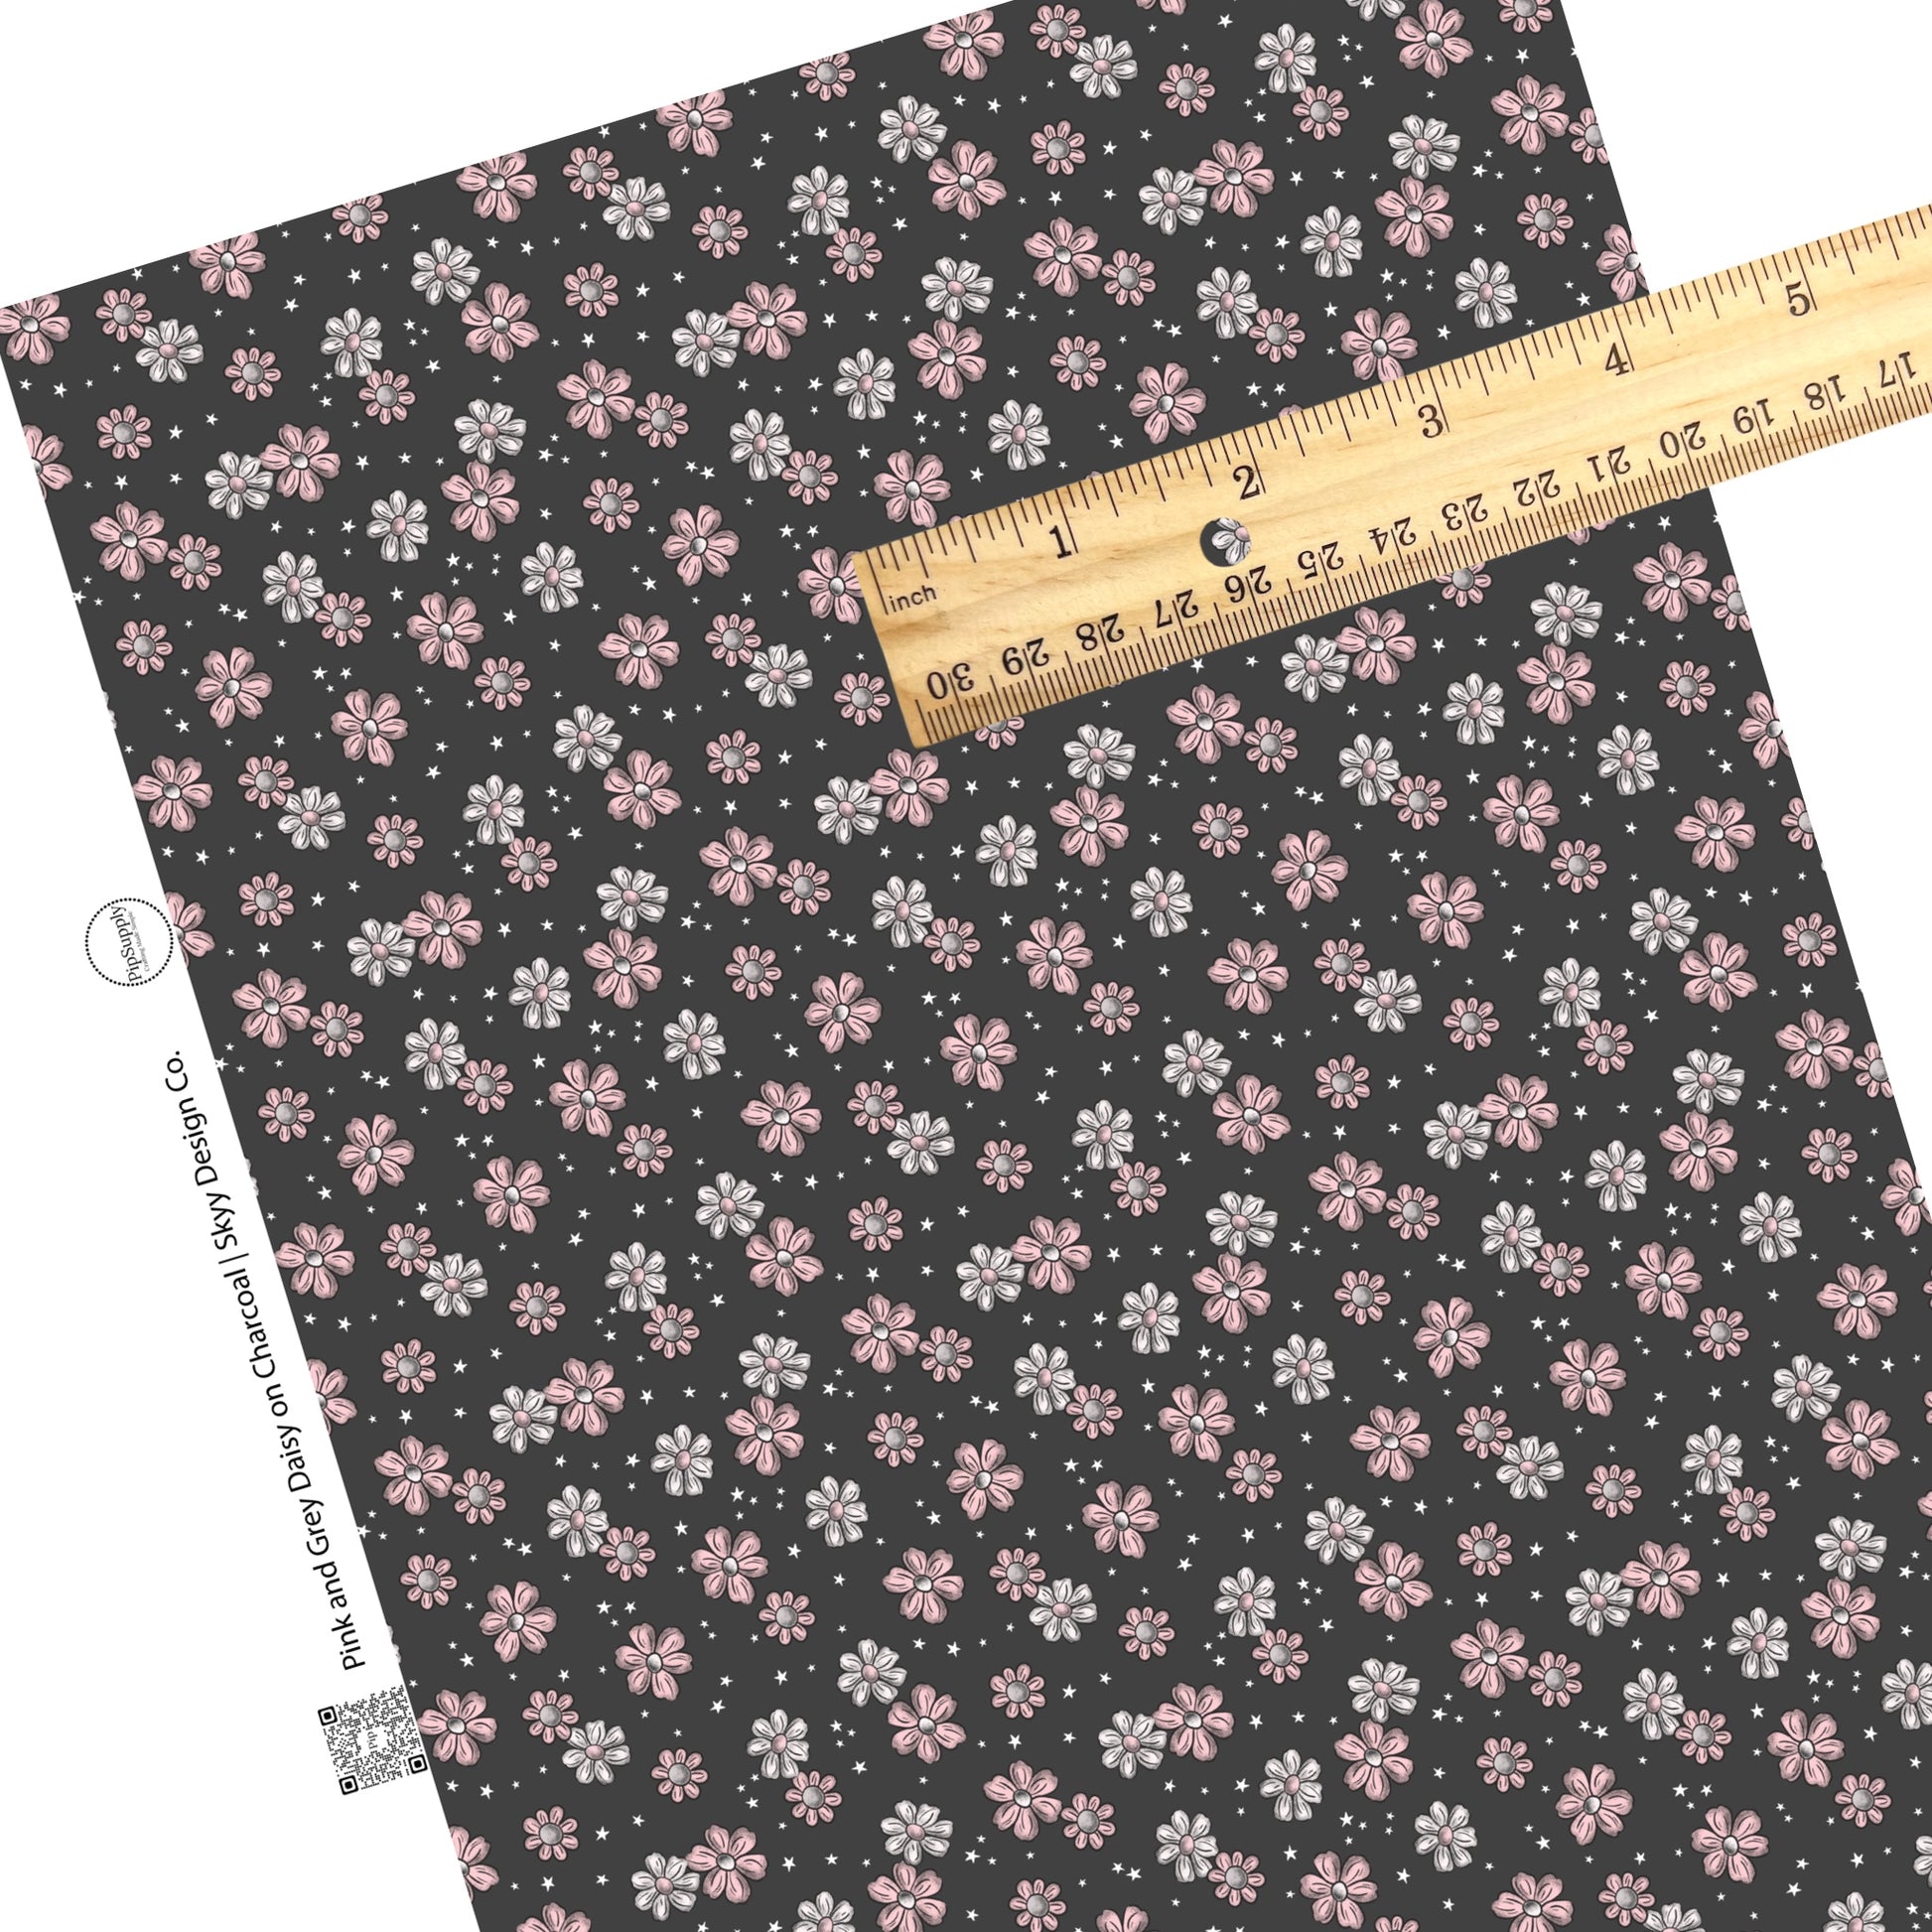 Scattered stars and flowers on charcoal faux leather sheets